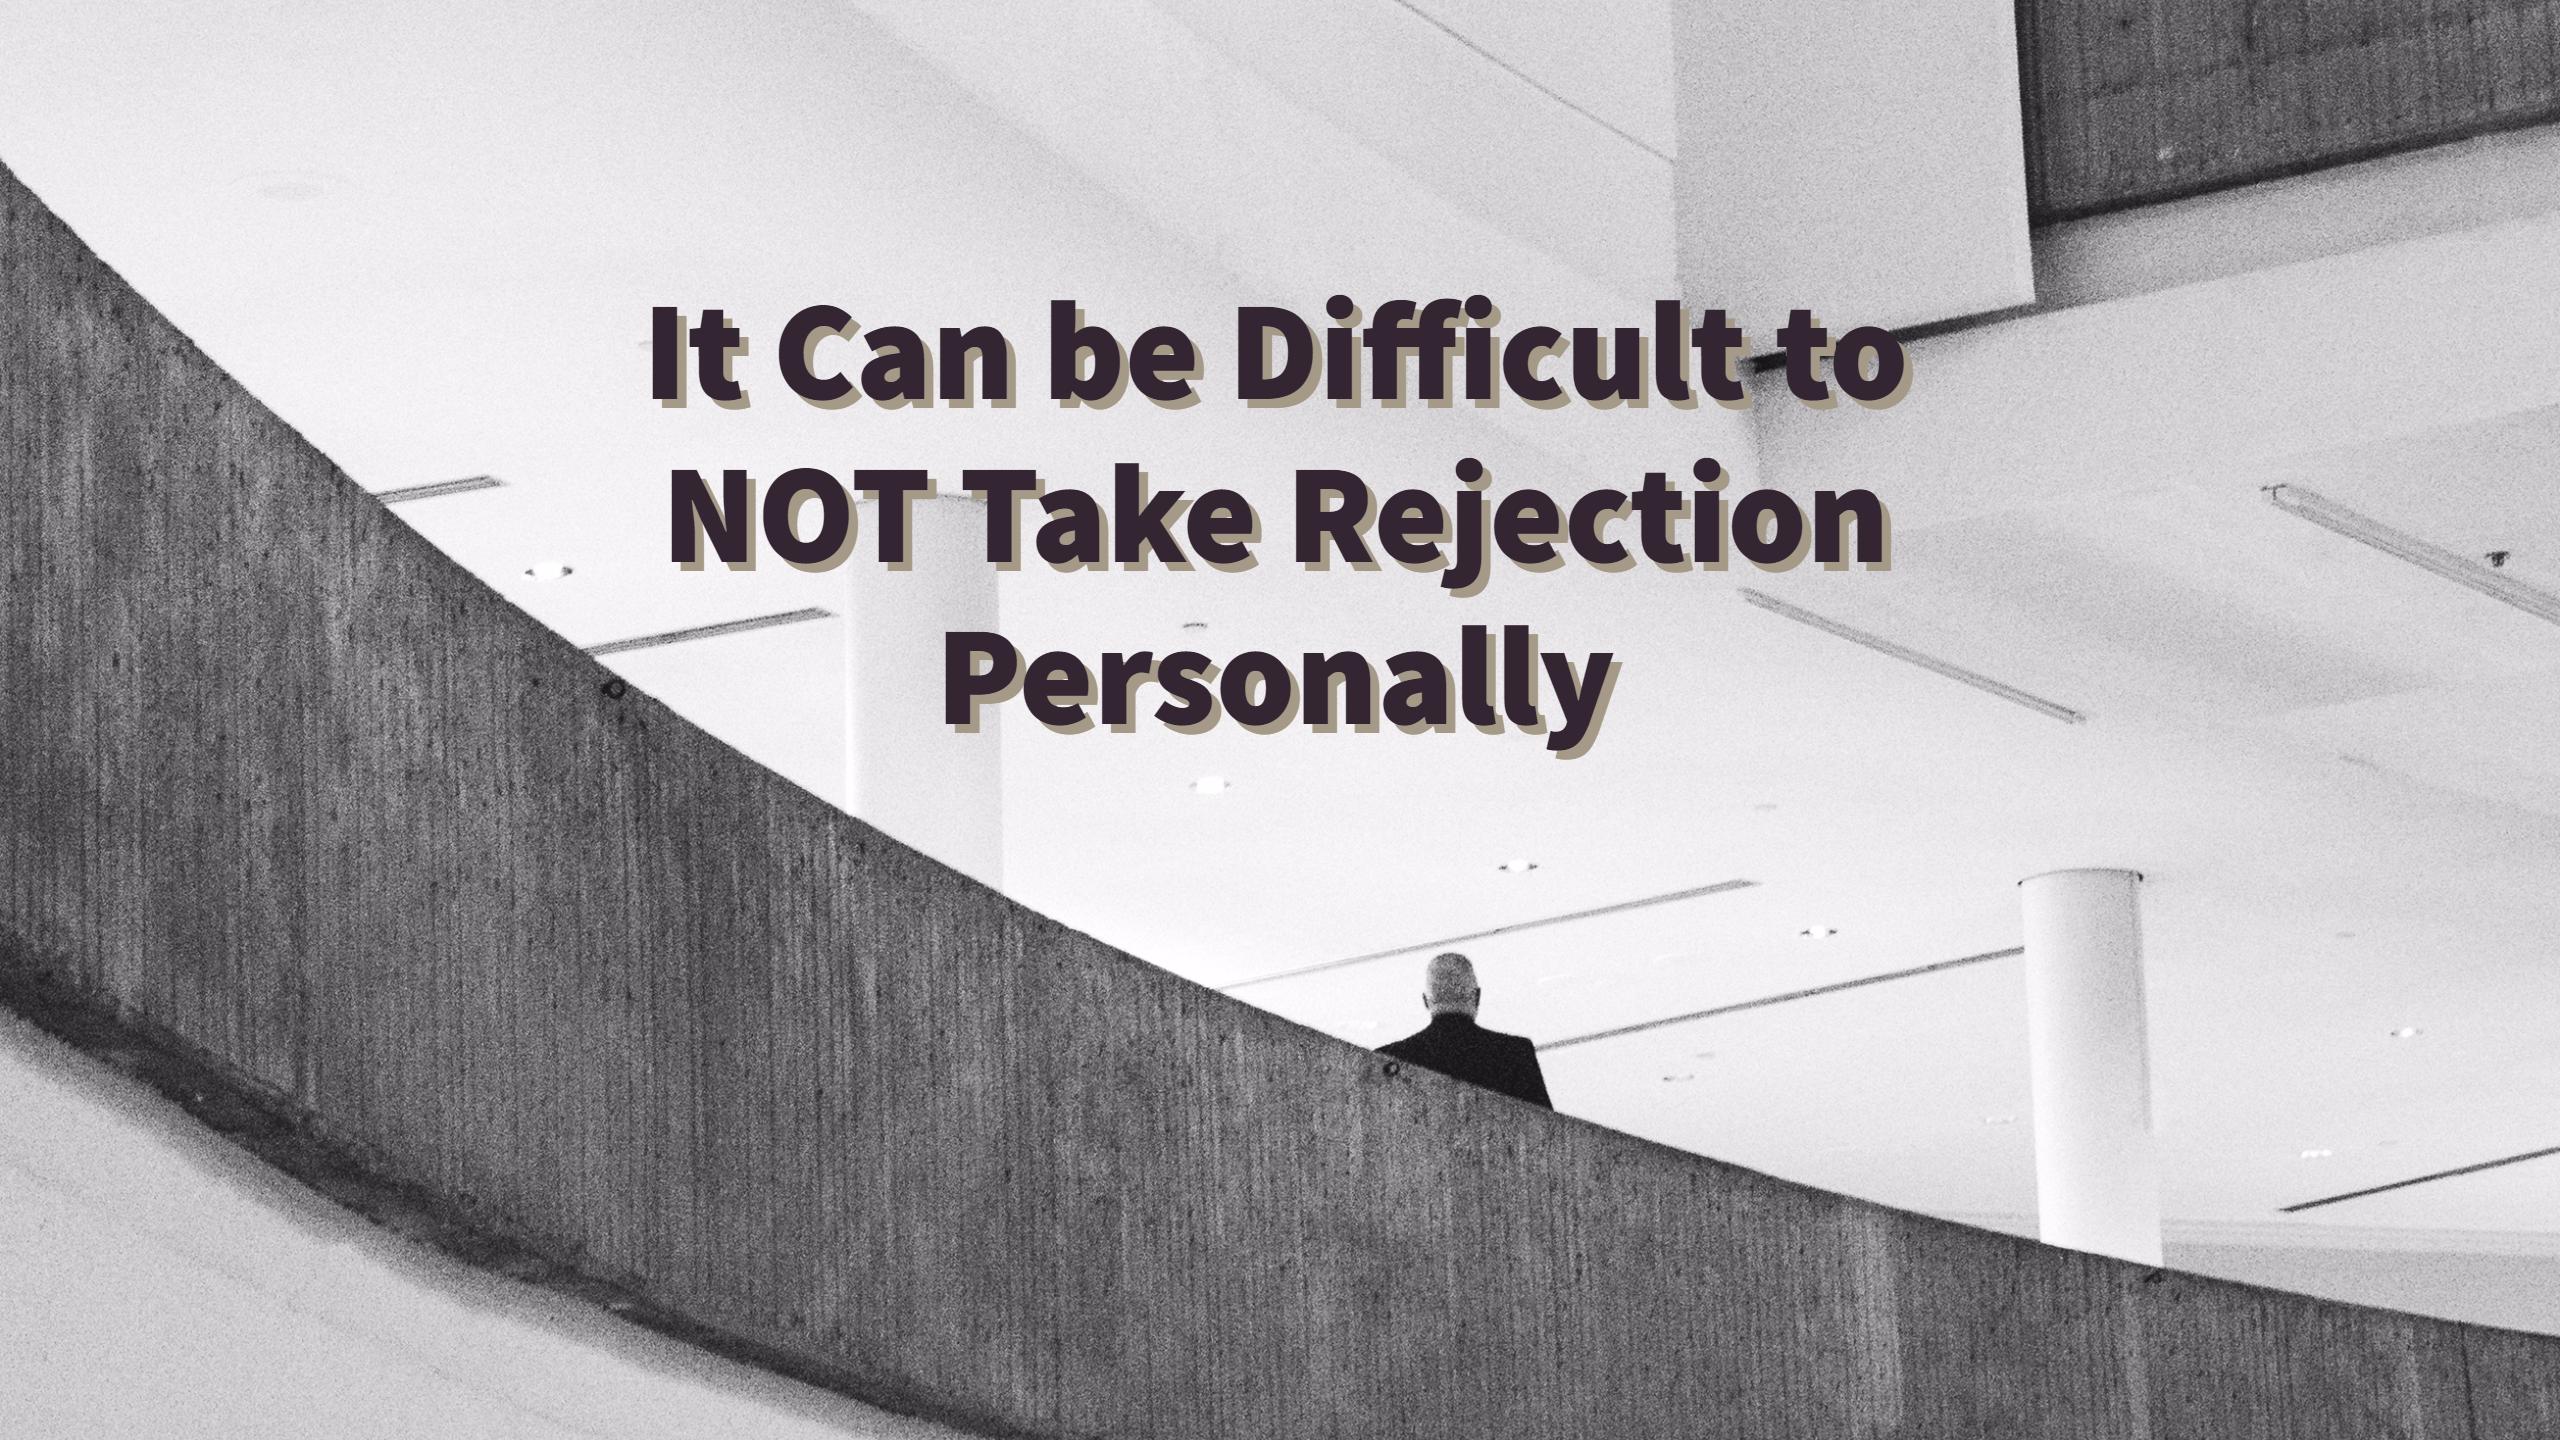 It Can be Difficult to NOT Take Rejection Personally